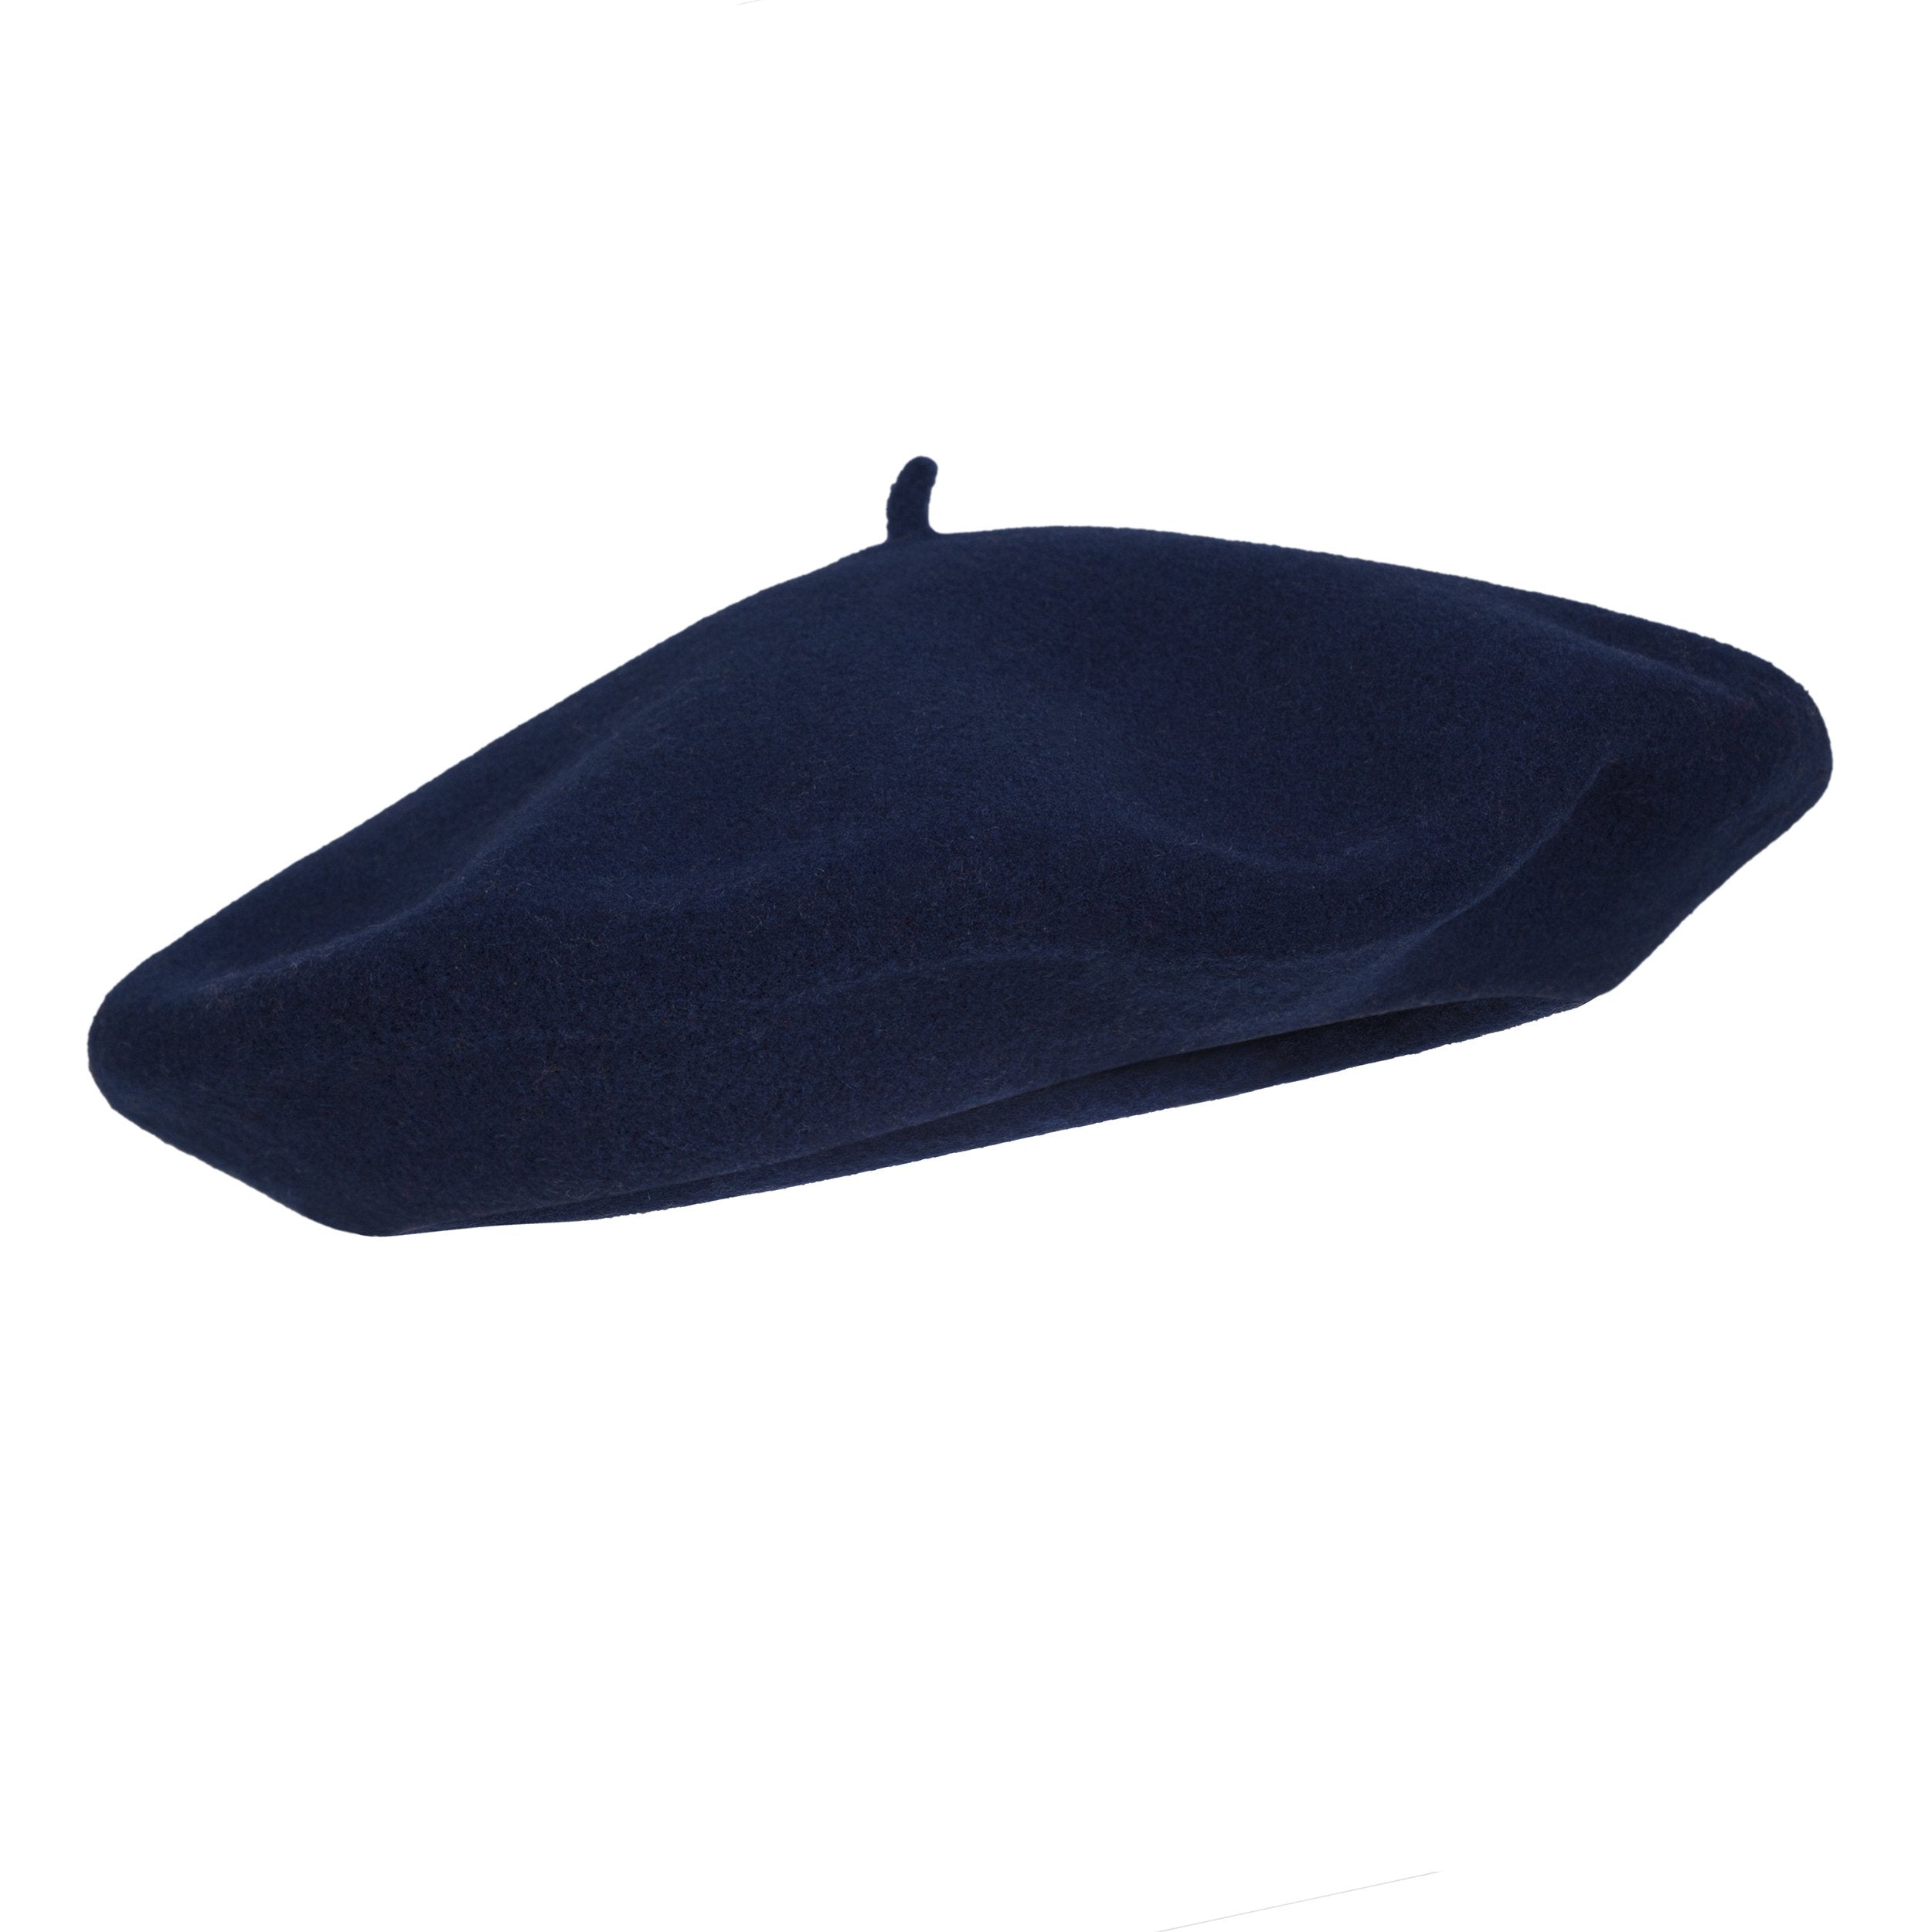 Navy Blue beret made in France by Laulhere